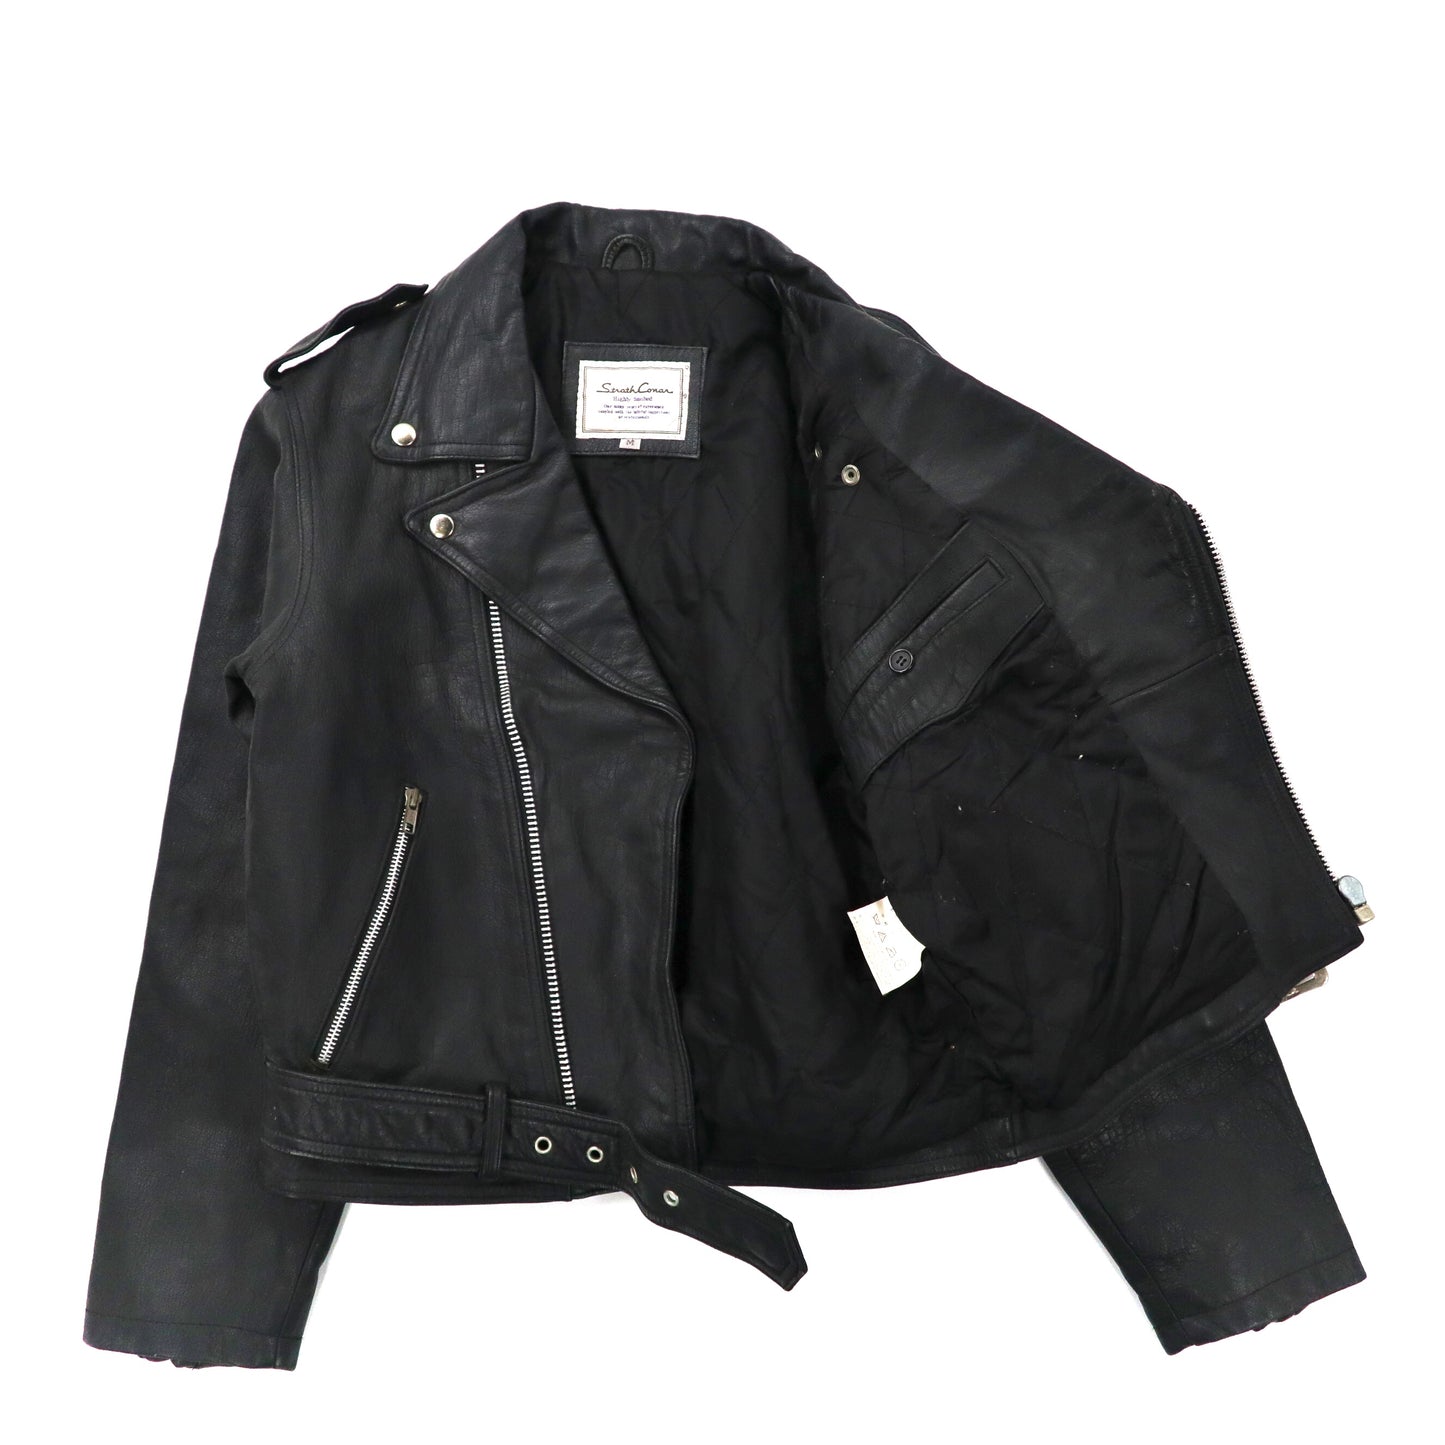 COWHIDE LEATHER W RIDERS JACKET Double Riders Jacket M Black Cow